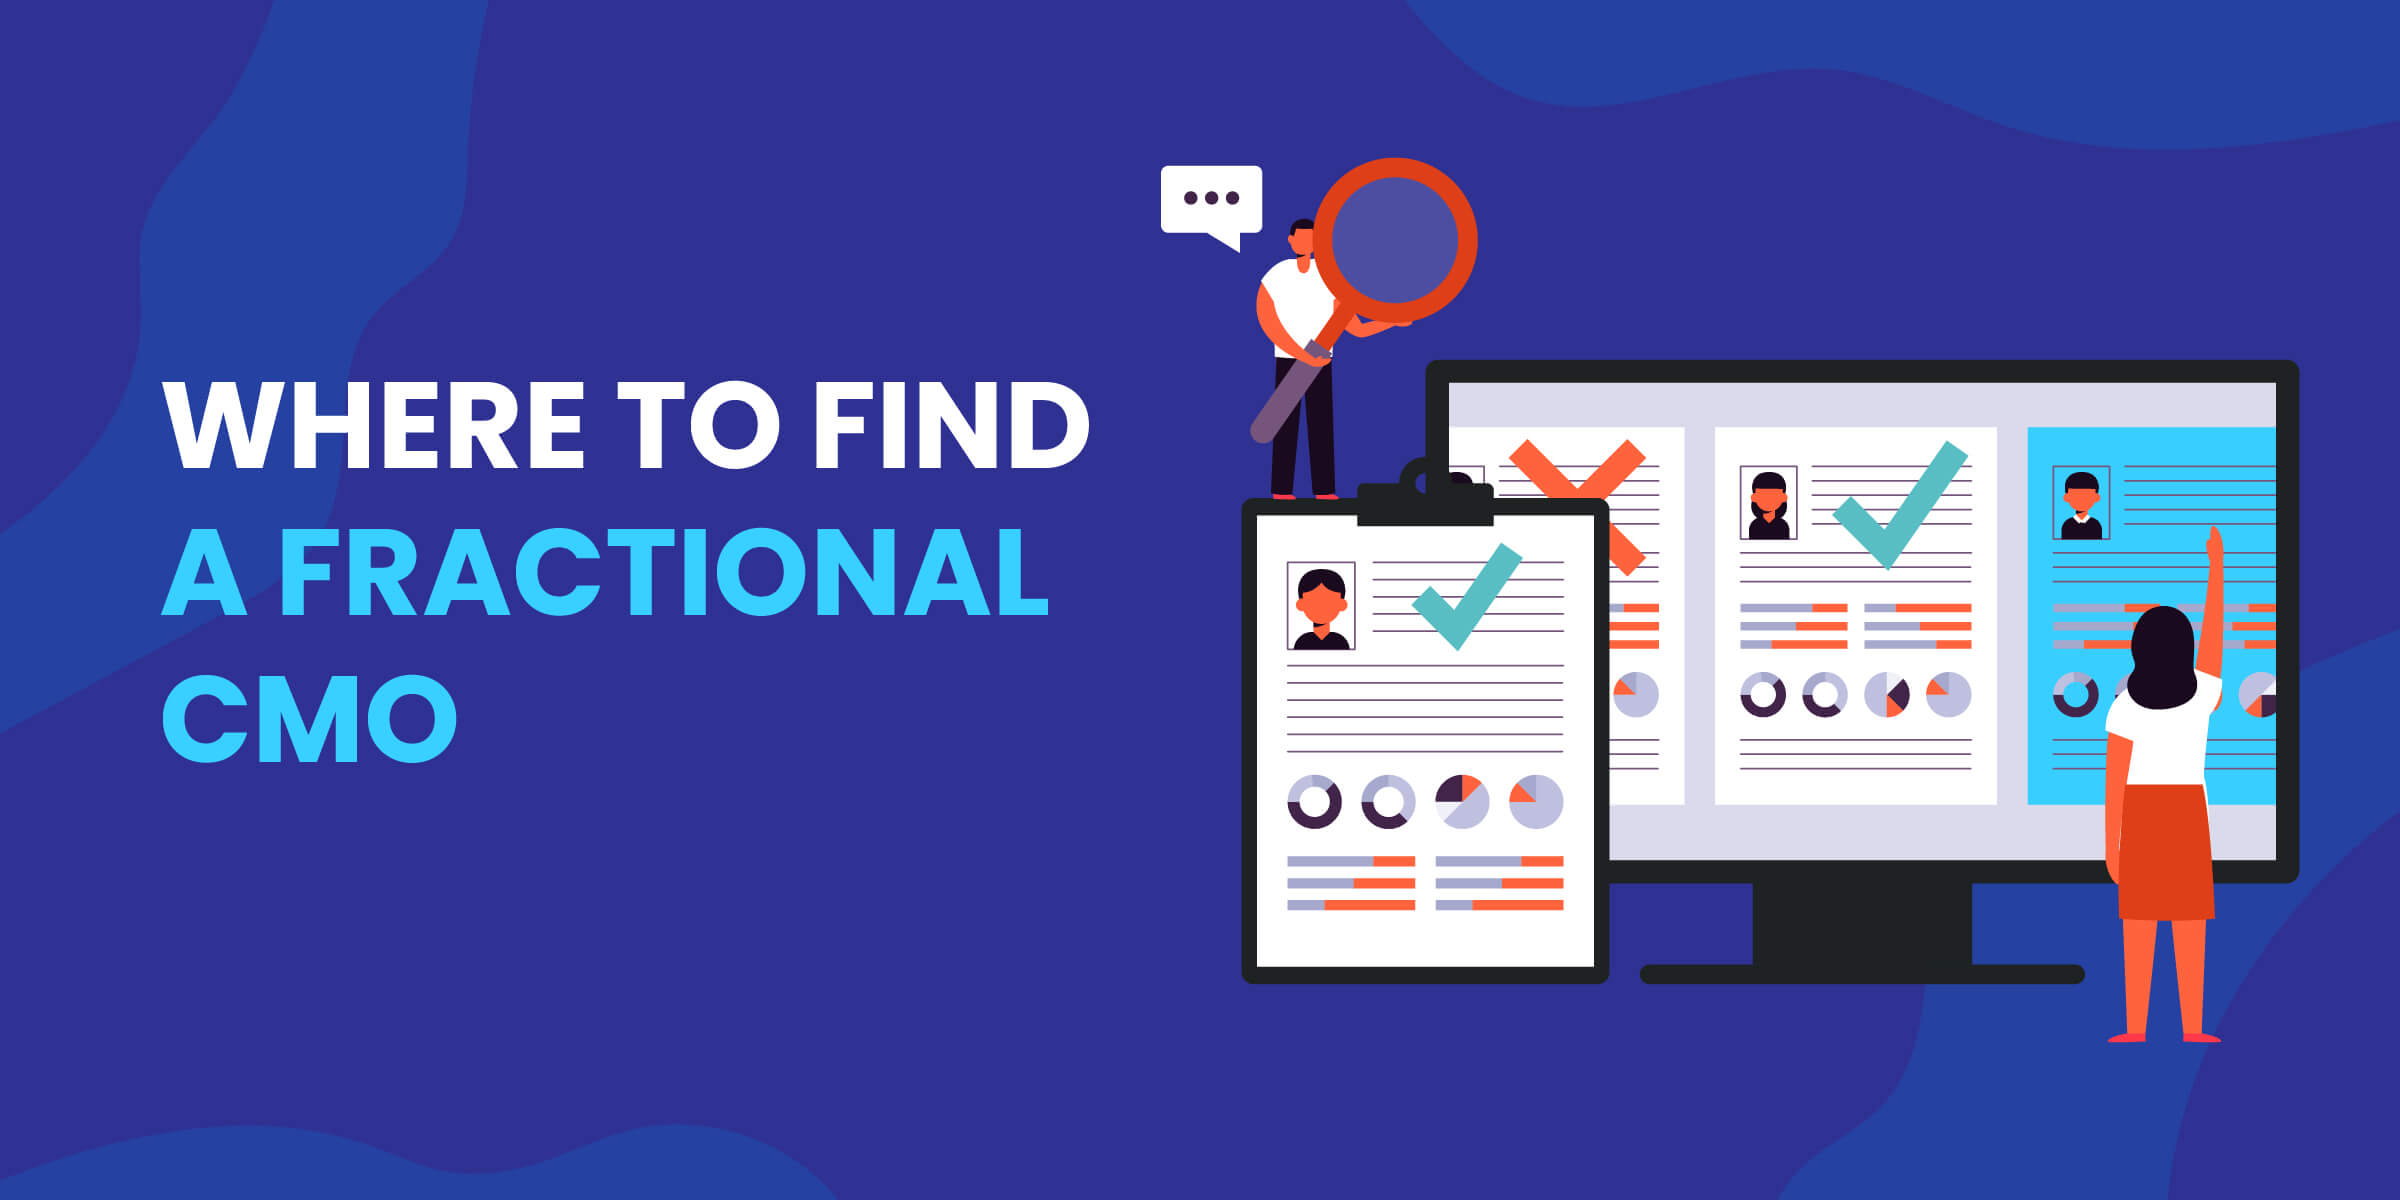 where to find a fractional cmo